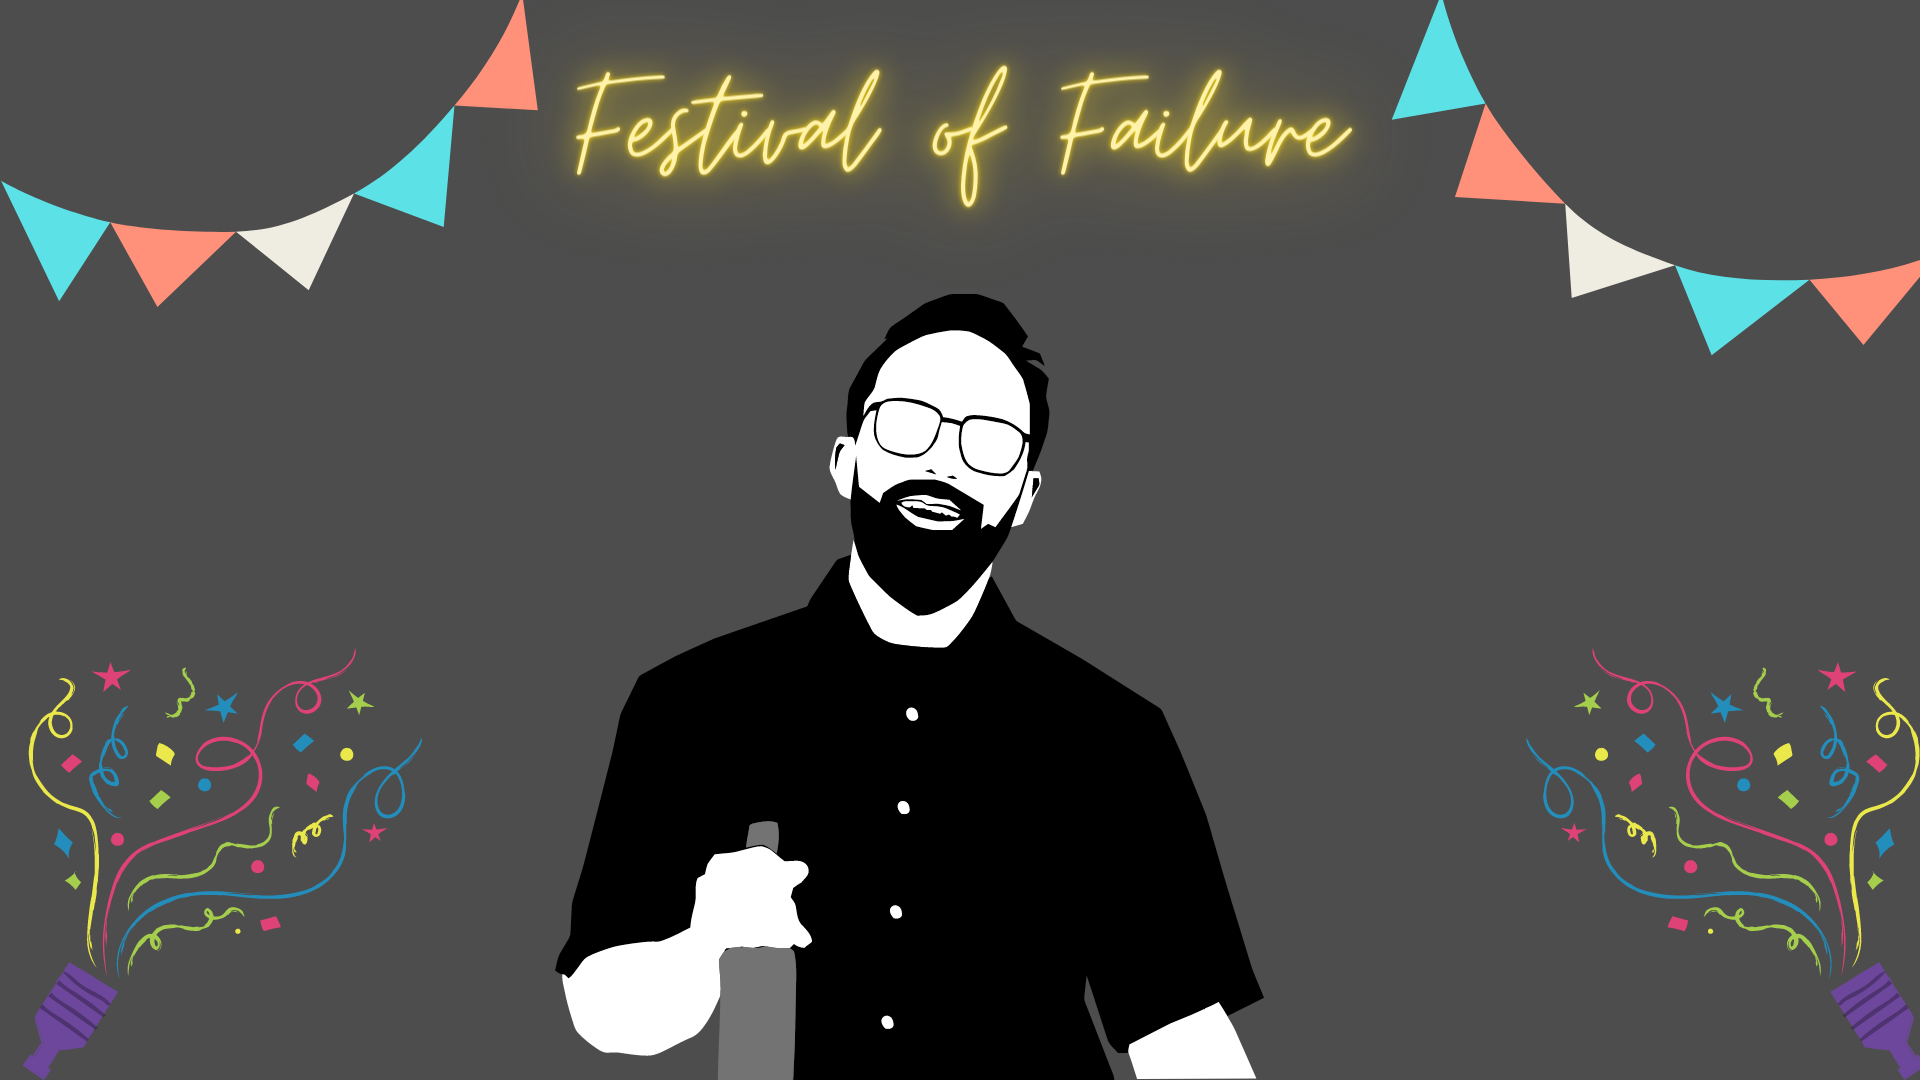 zoom background for festival of failure